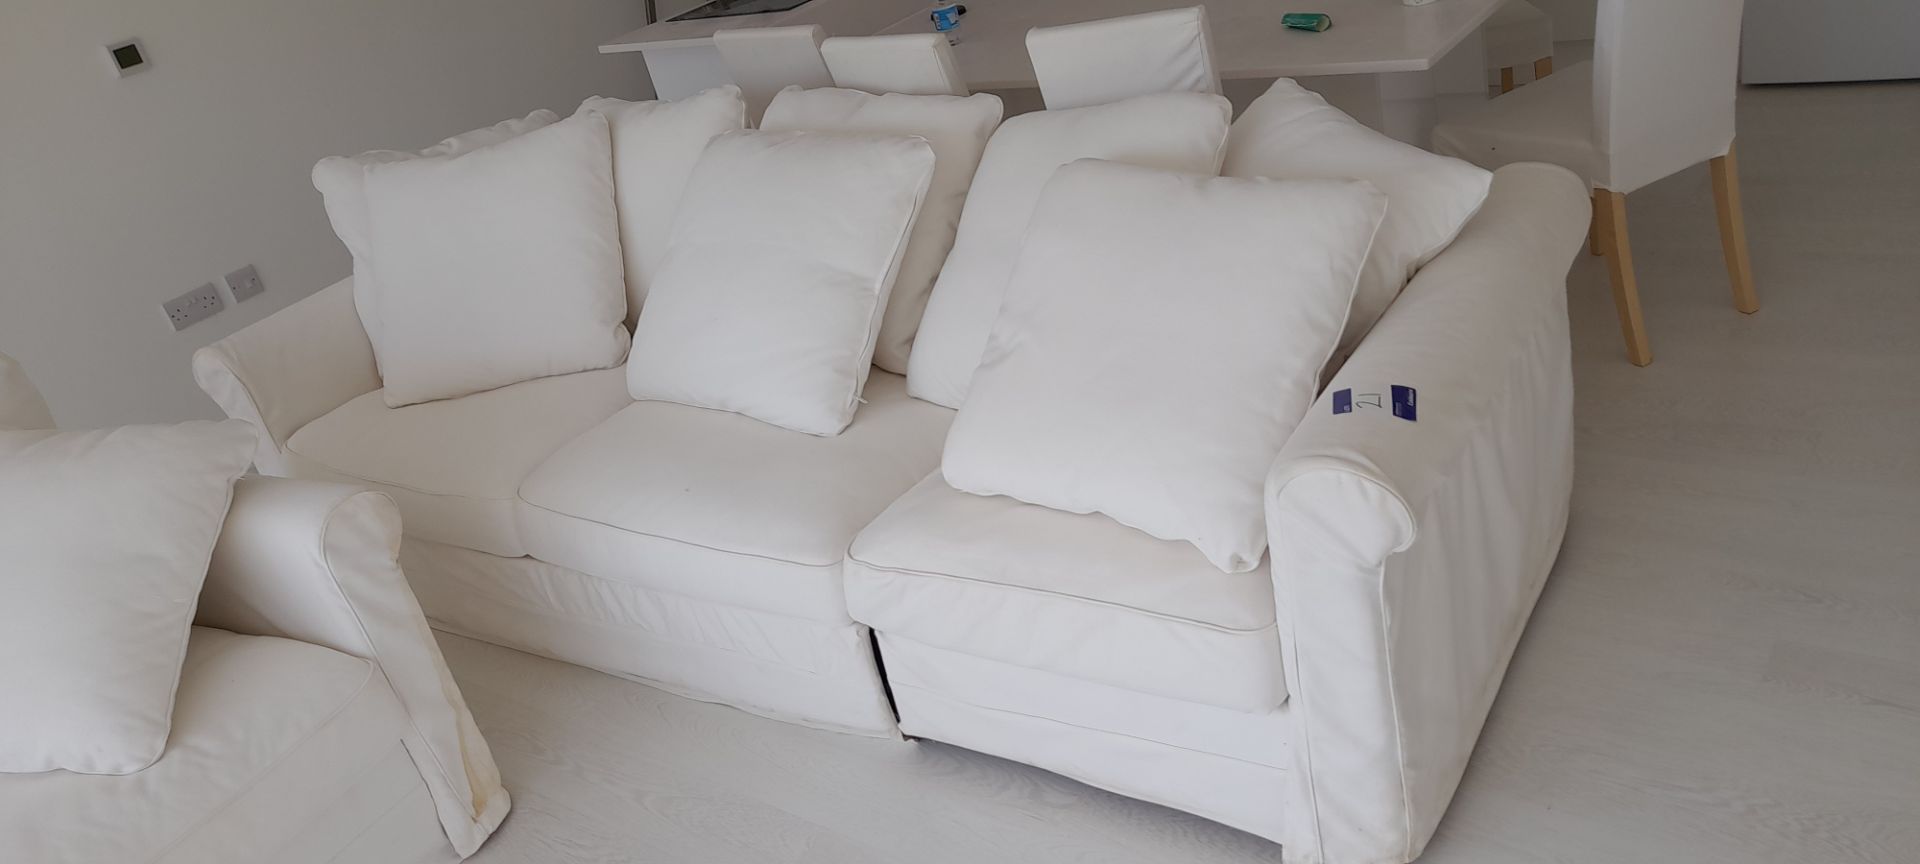 3 Seater White Linen Sofa with Double Bed Pull Out (Located on 2nd floor) - Image 4 of 4